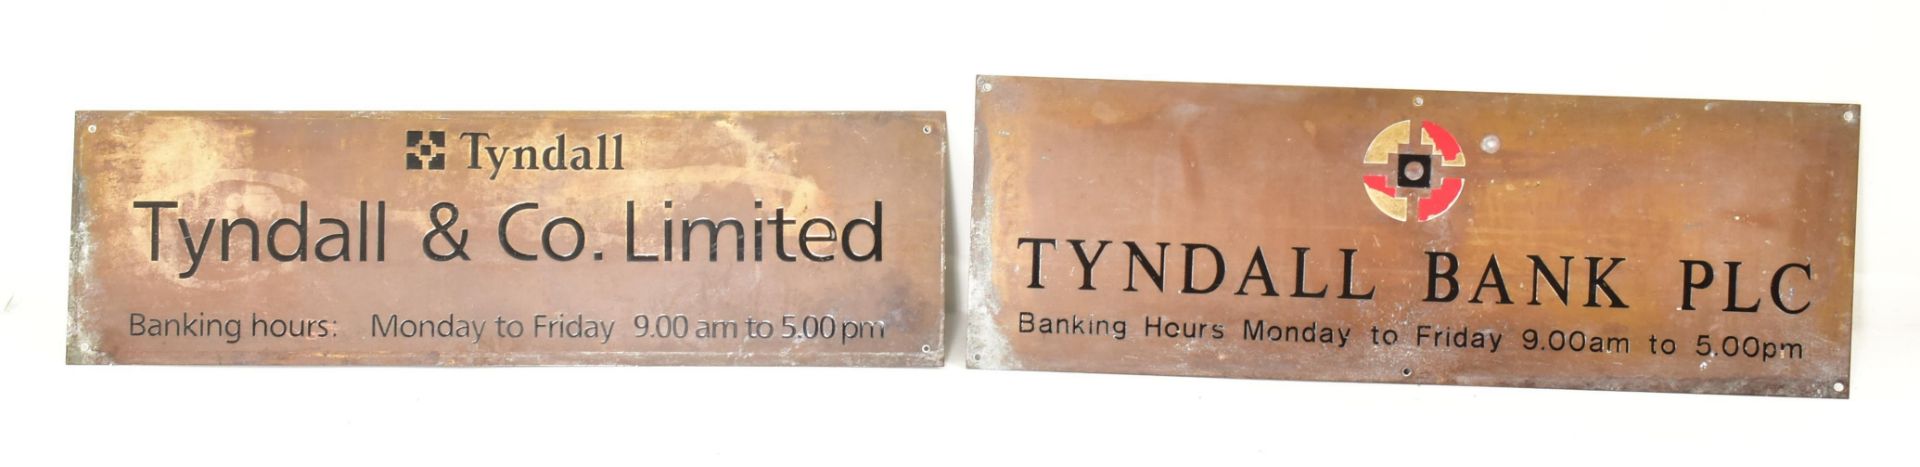 TYNDALL & CO. LIMITED - PAIR OF METAL STREET SIGNS